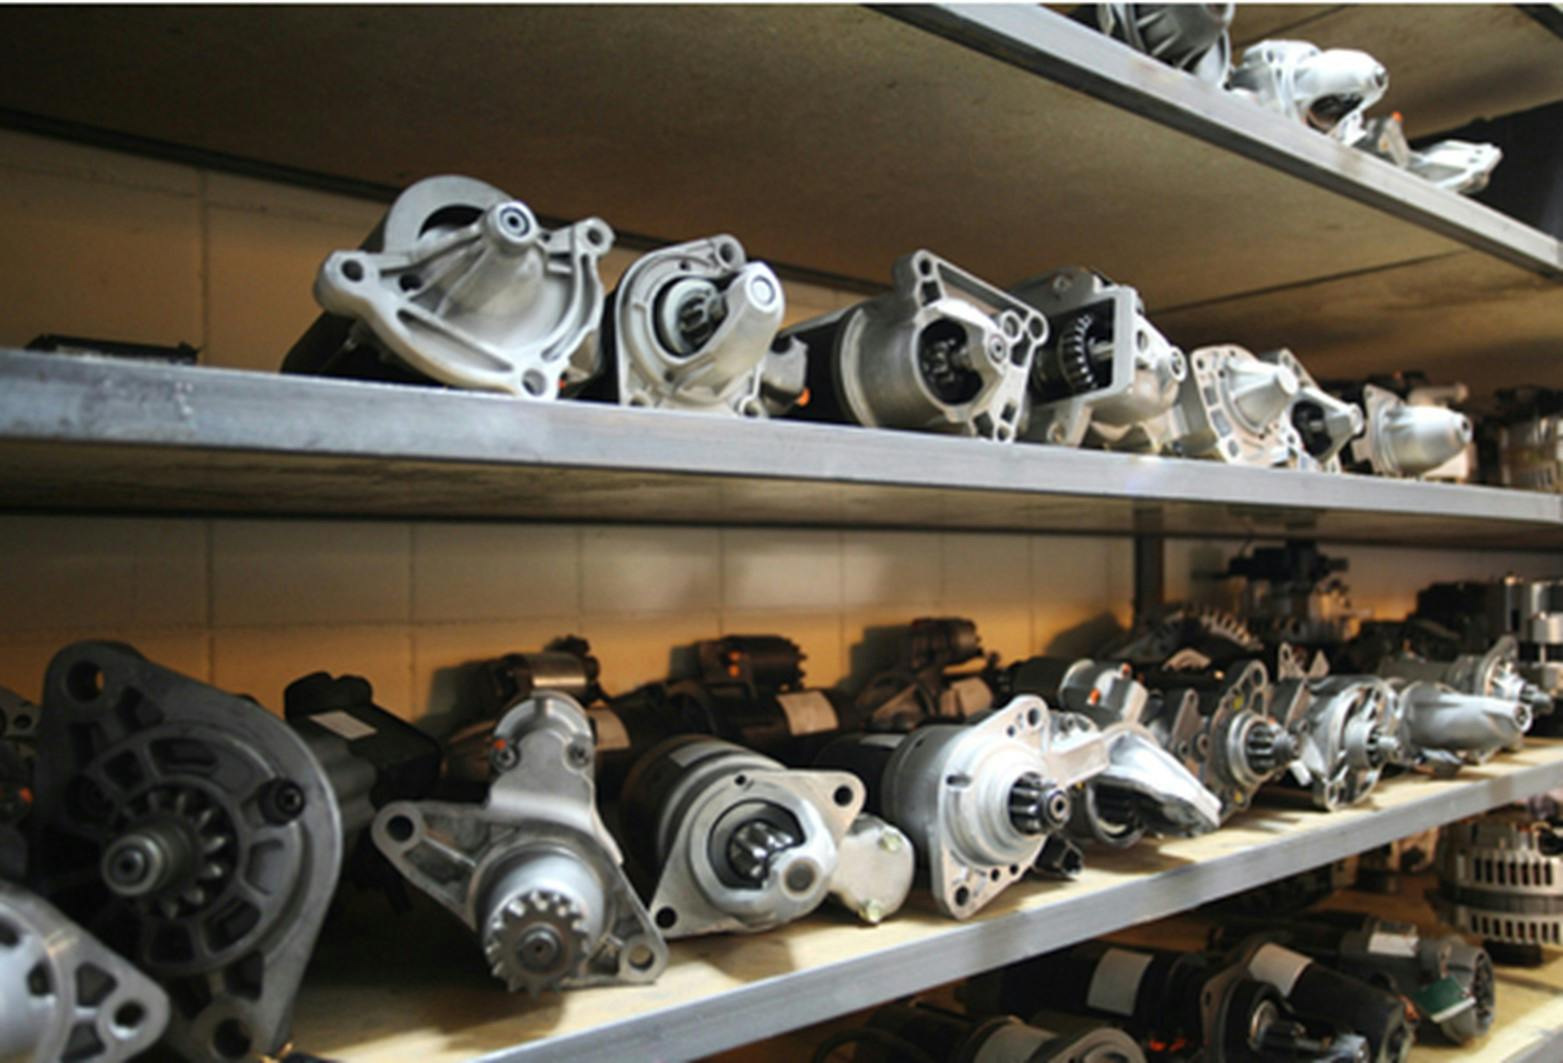 A collection of starter motors sitting on stock shelves